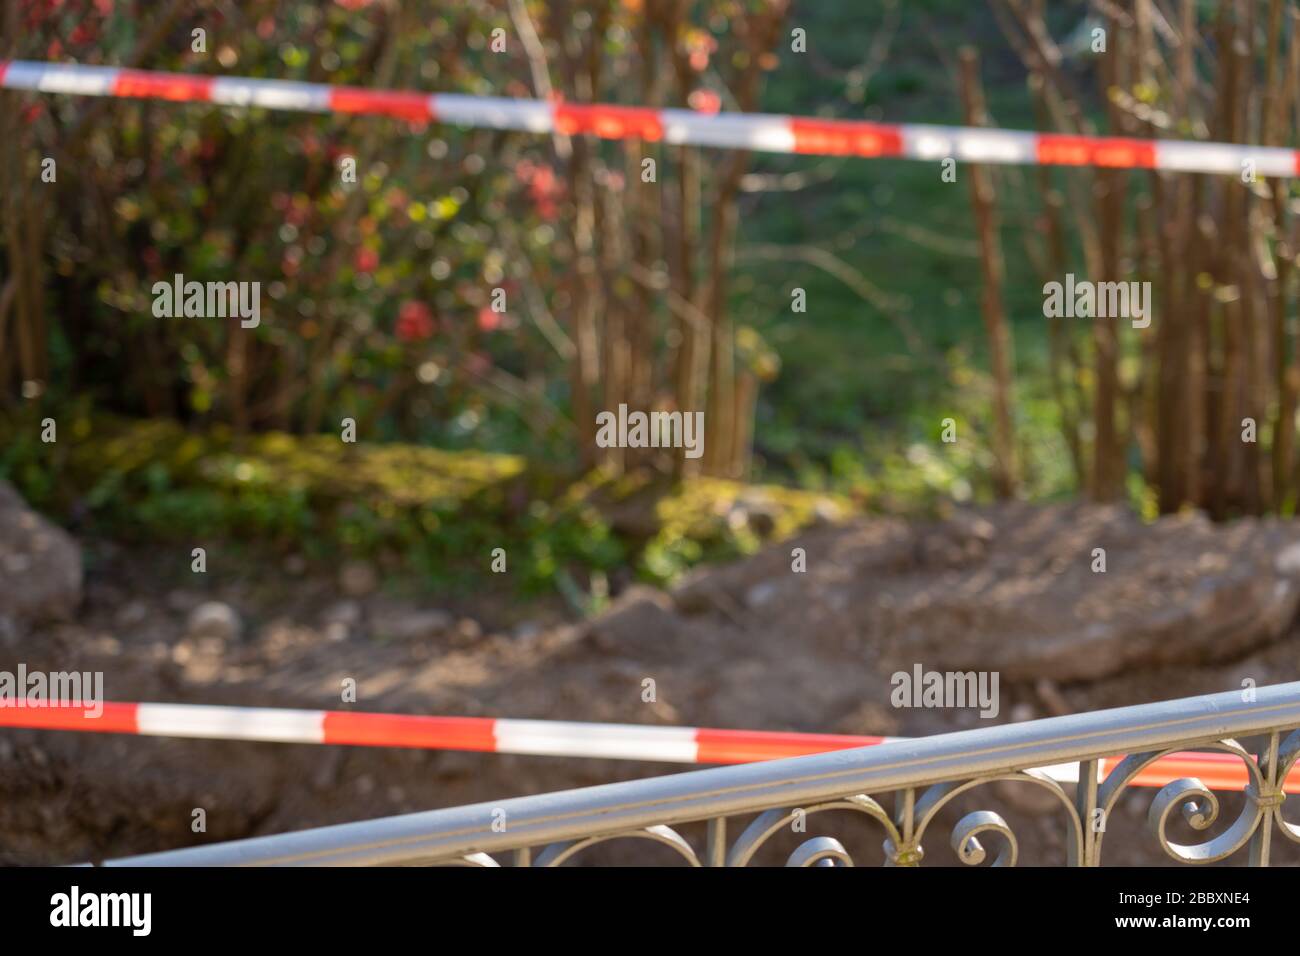 Beautiful ornamented metal fence in foreground. Blurred background with red and white temporary tape barrier in back yard. Space for text. Stock Photo